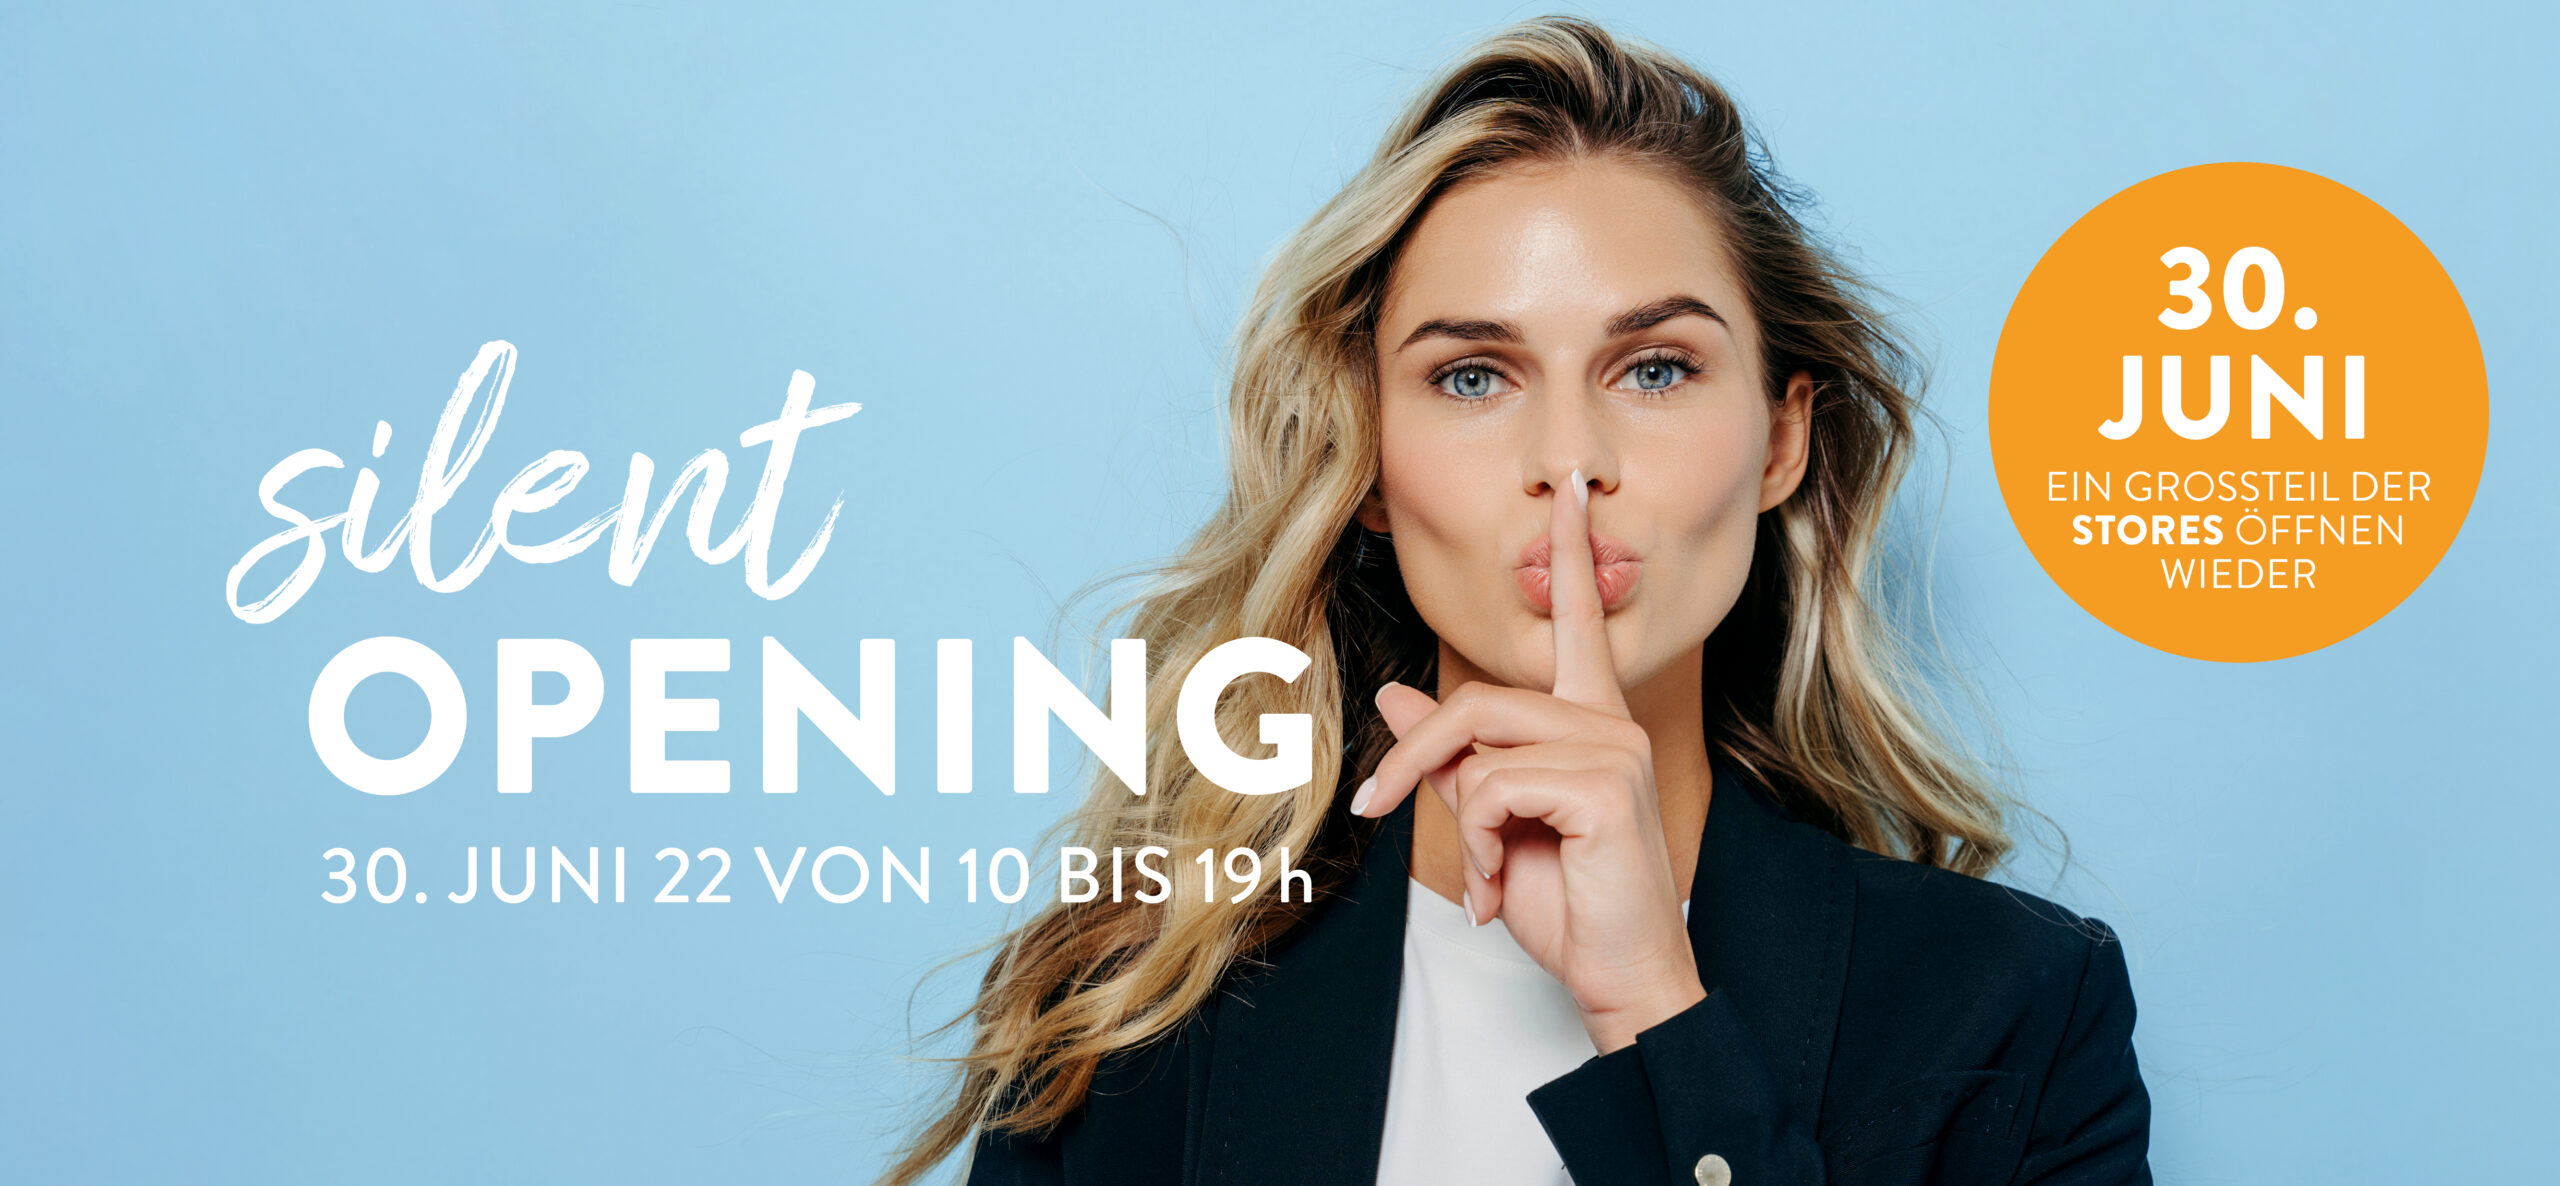 cobam cas online silentopening newsevents scaled - City Outlet Bad MÜnstereifel